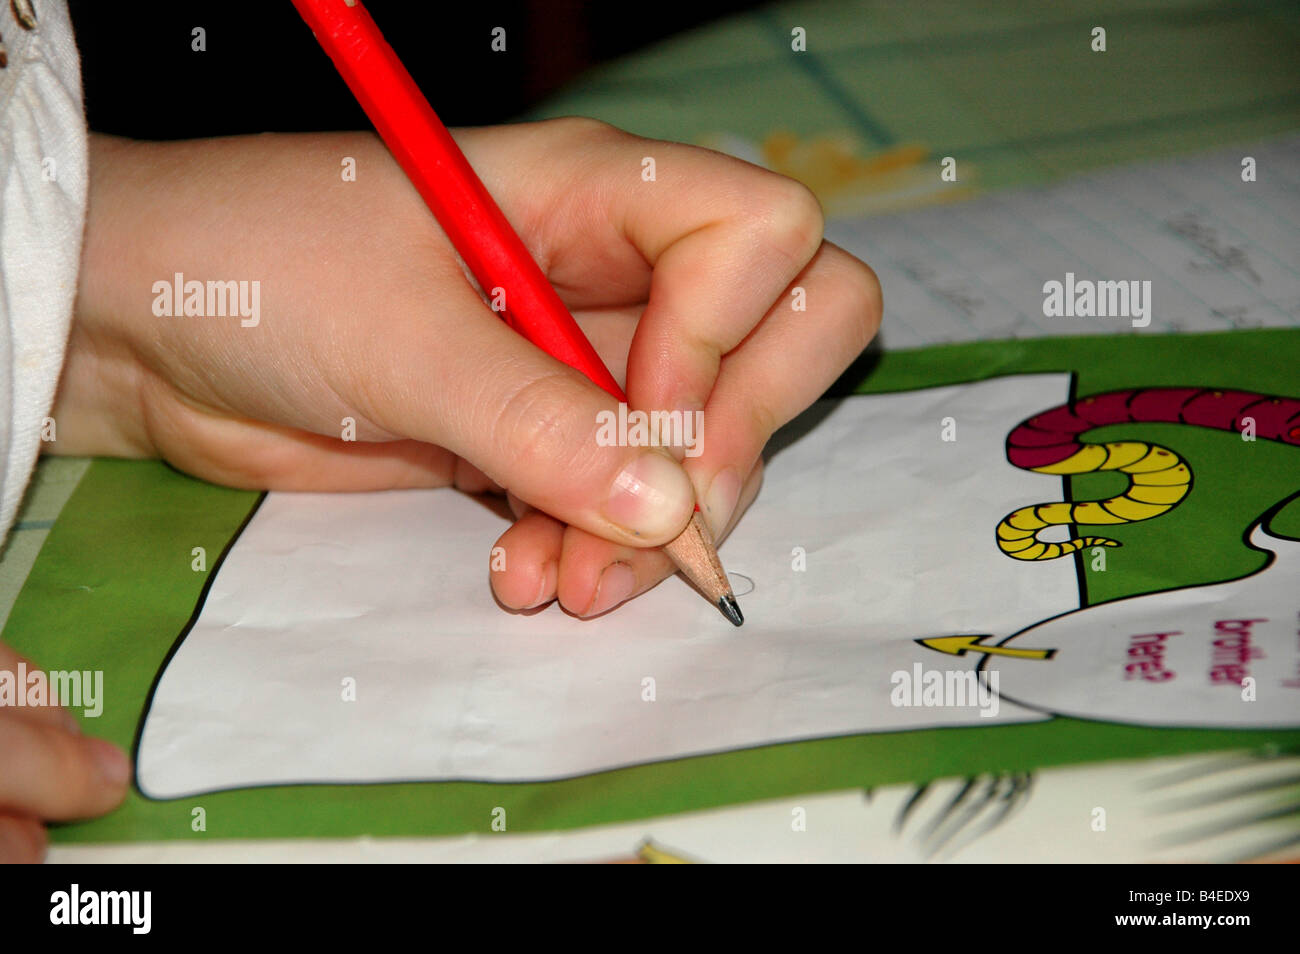 A young girl with pencil in hand begins to draw a picture in an art activity book. Stock Photo